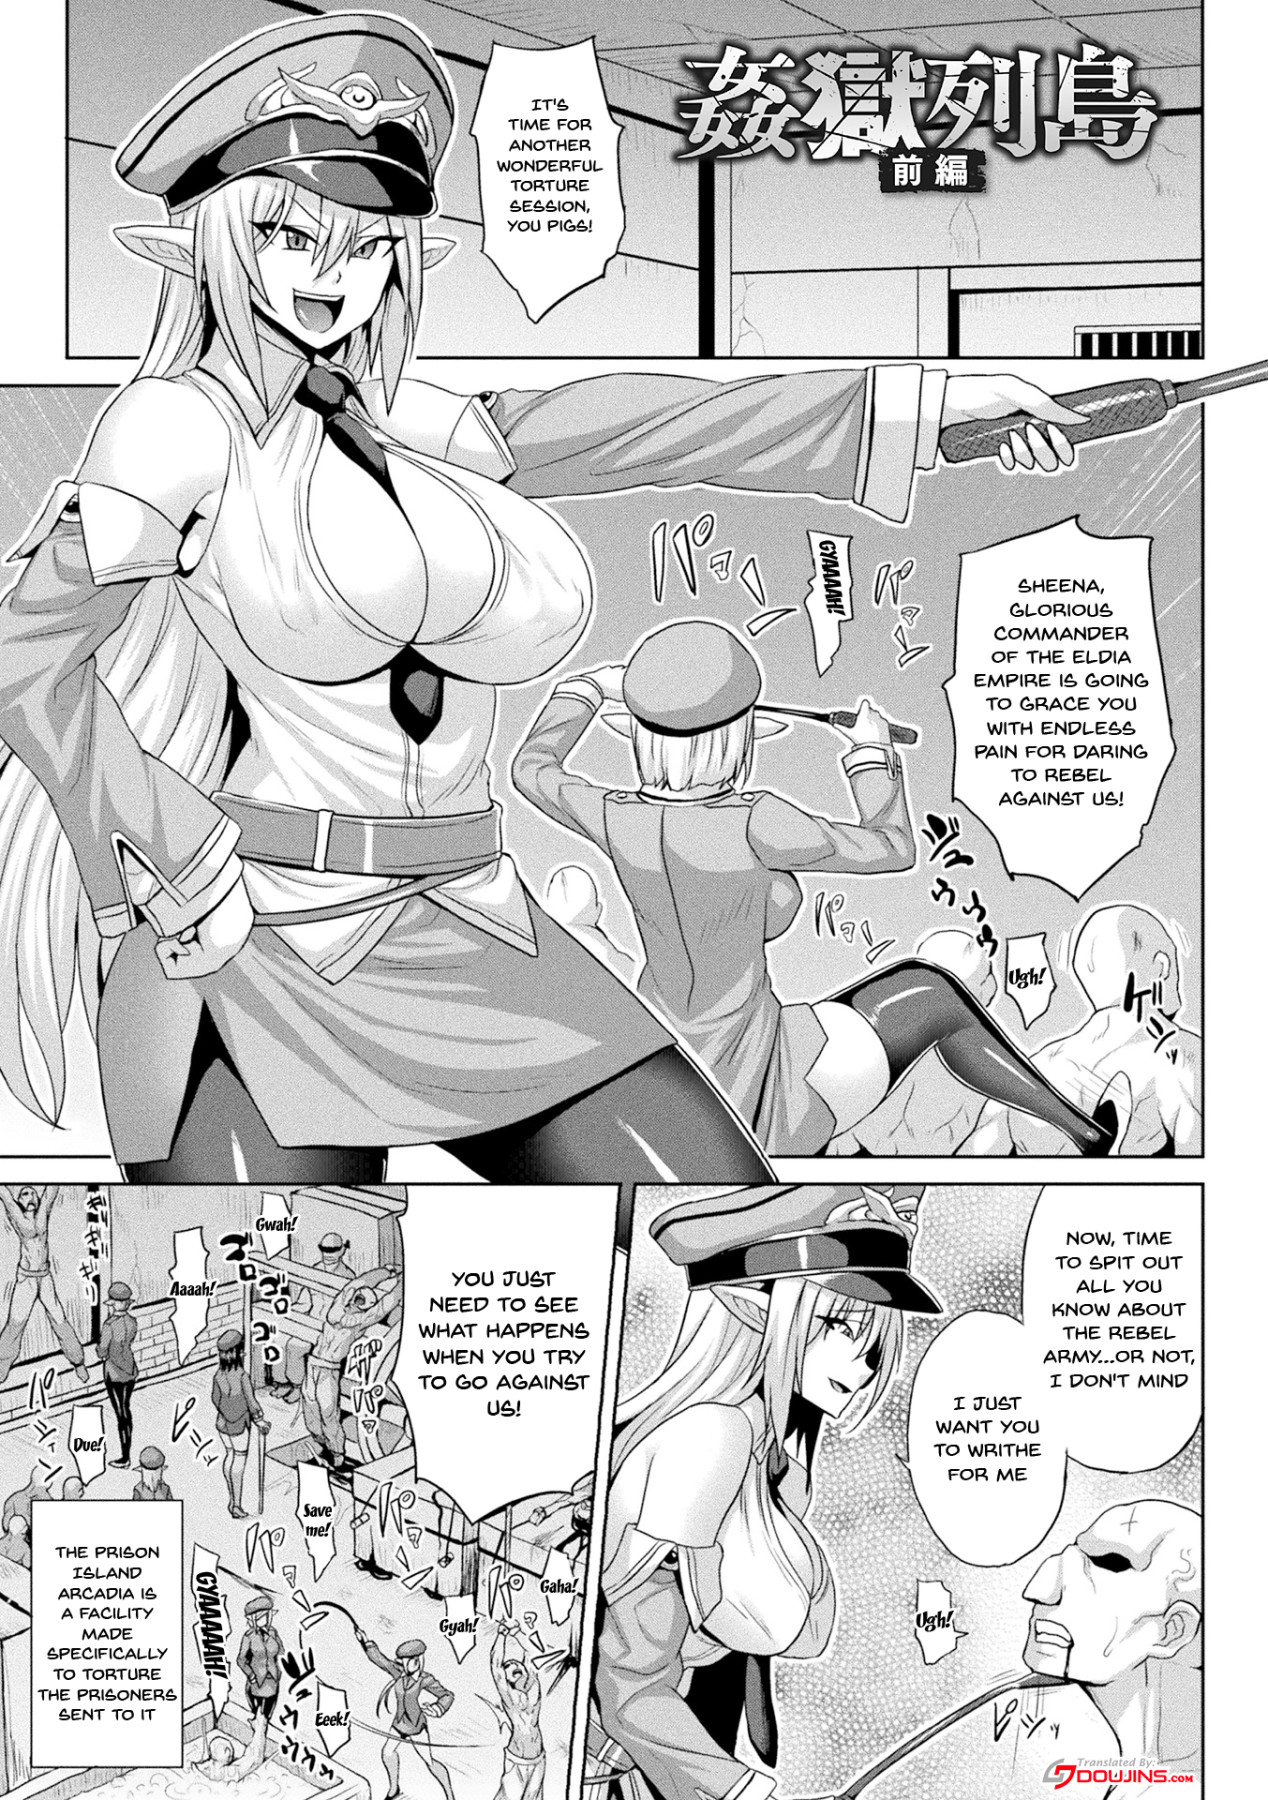 Hentai Manga Comic-The Woman Who's Fallen Into Being a Slut In Defeat-Chapter 1-4